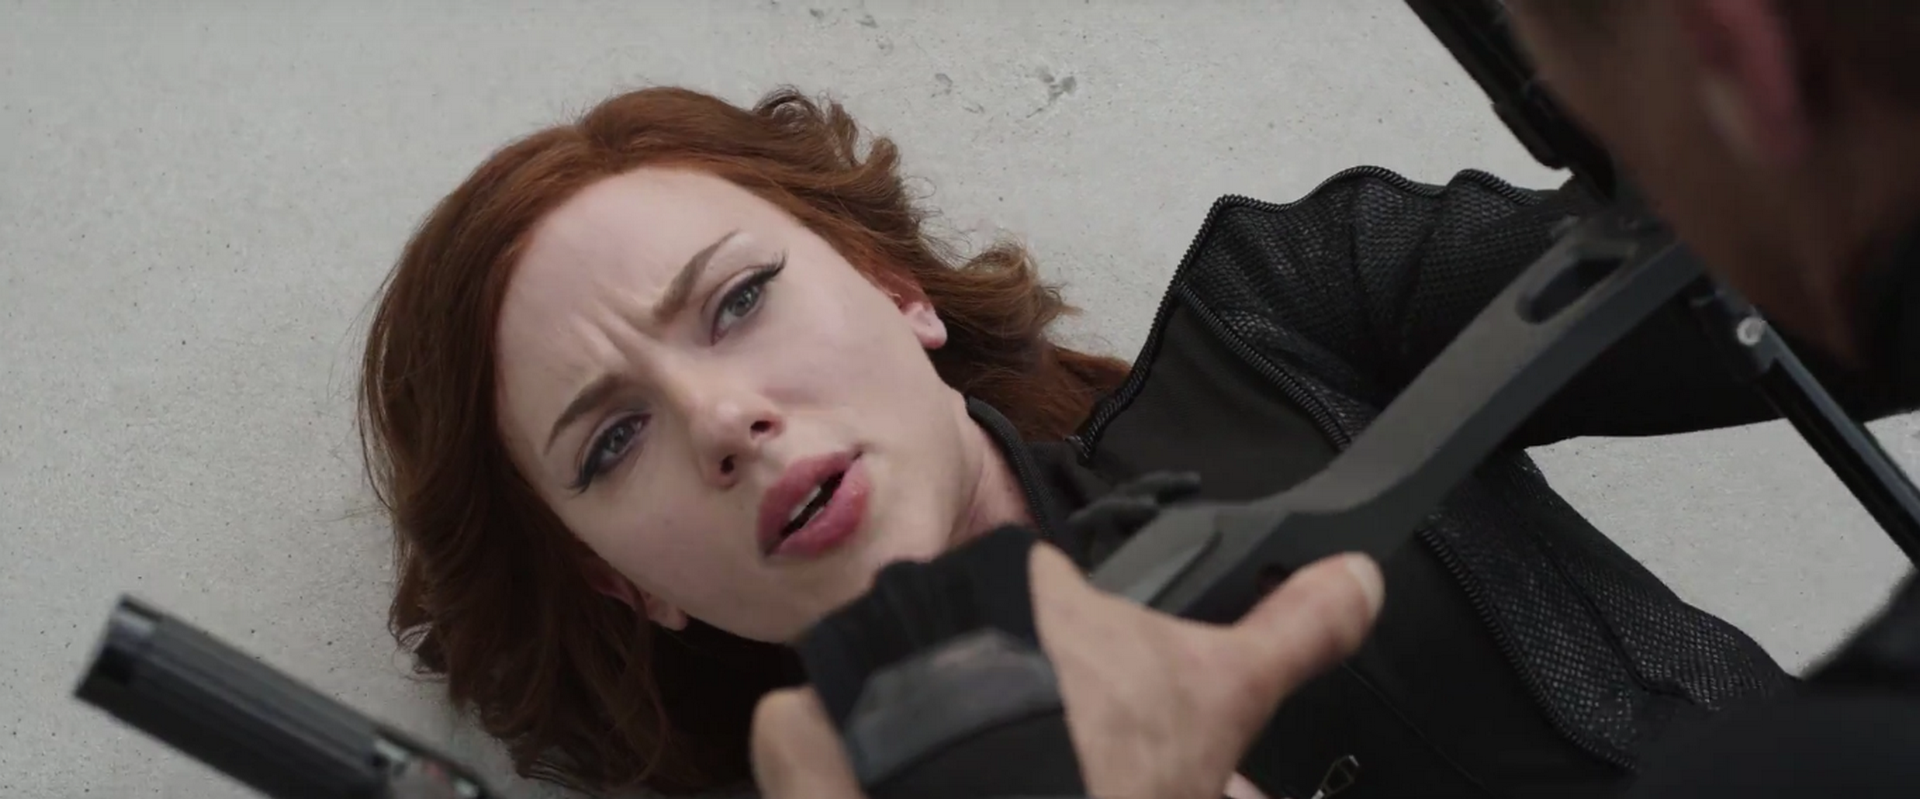 The Tears of Captain America in Avengers: Endgame Trailer - and the Comics